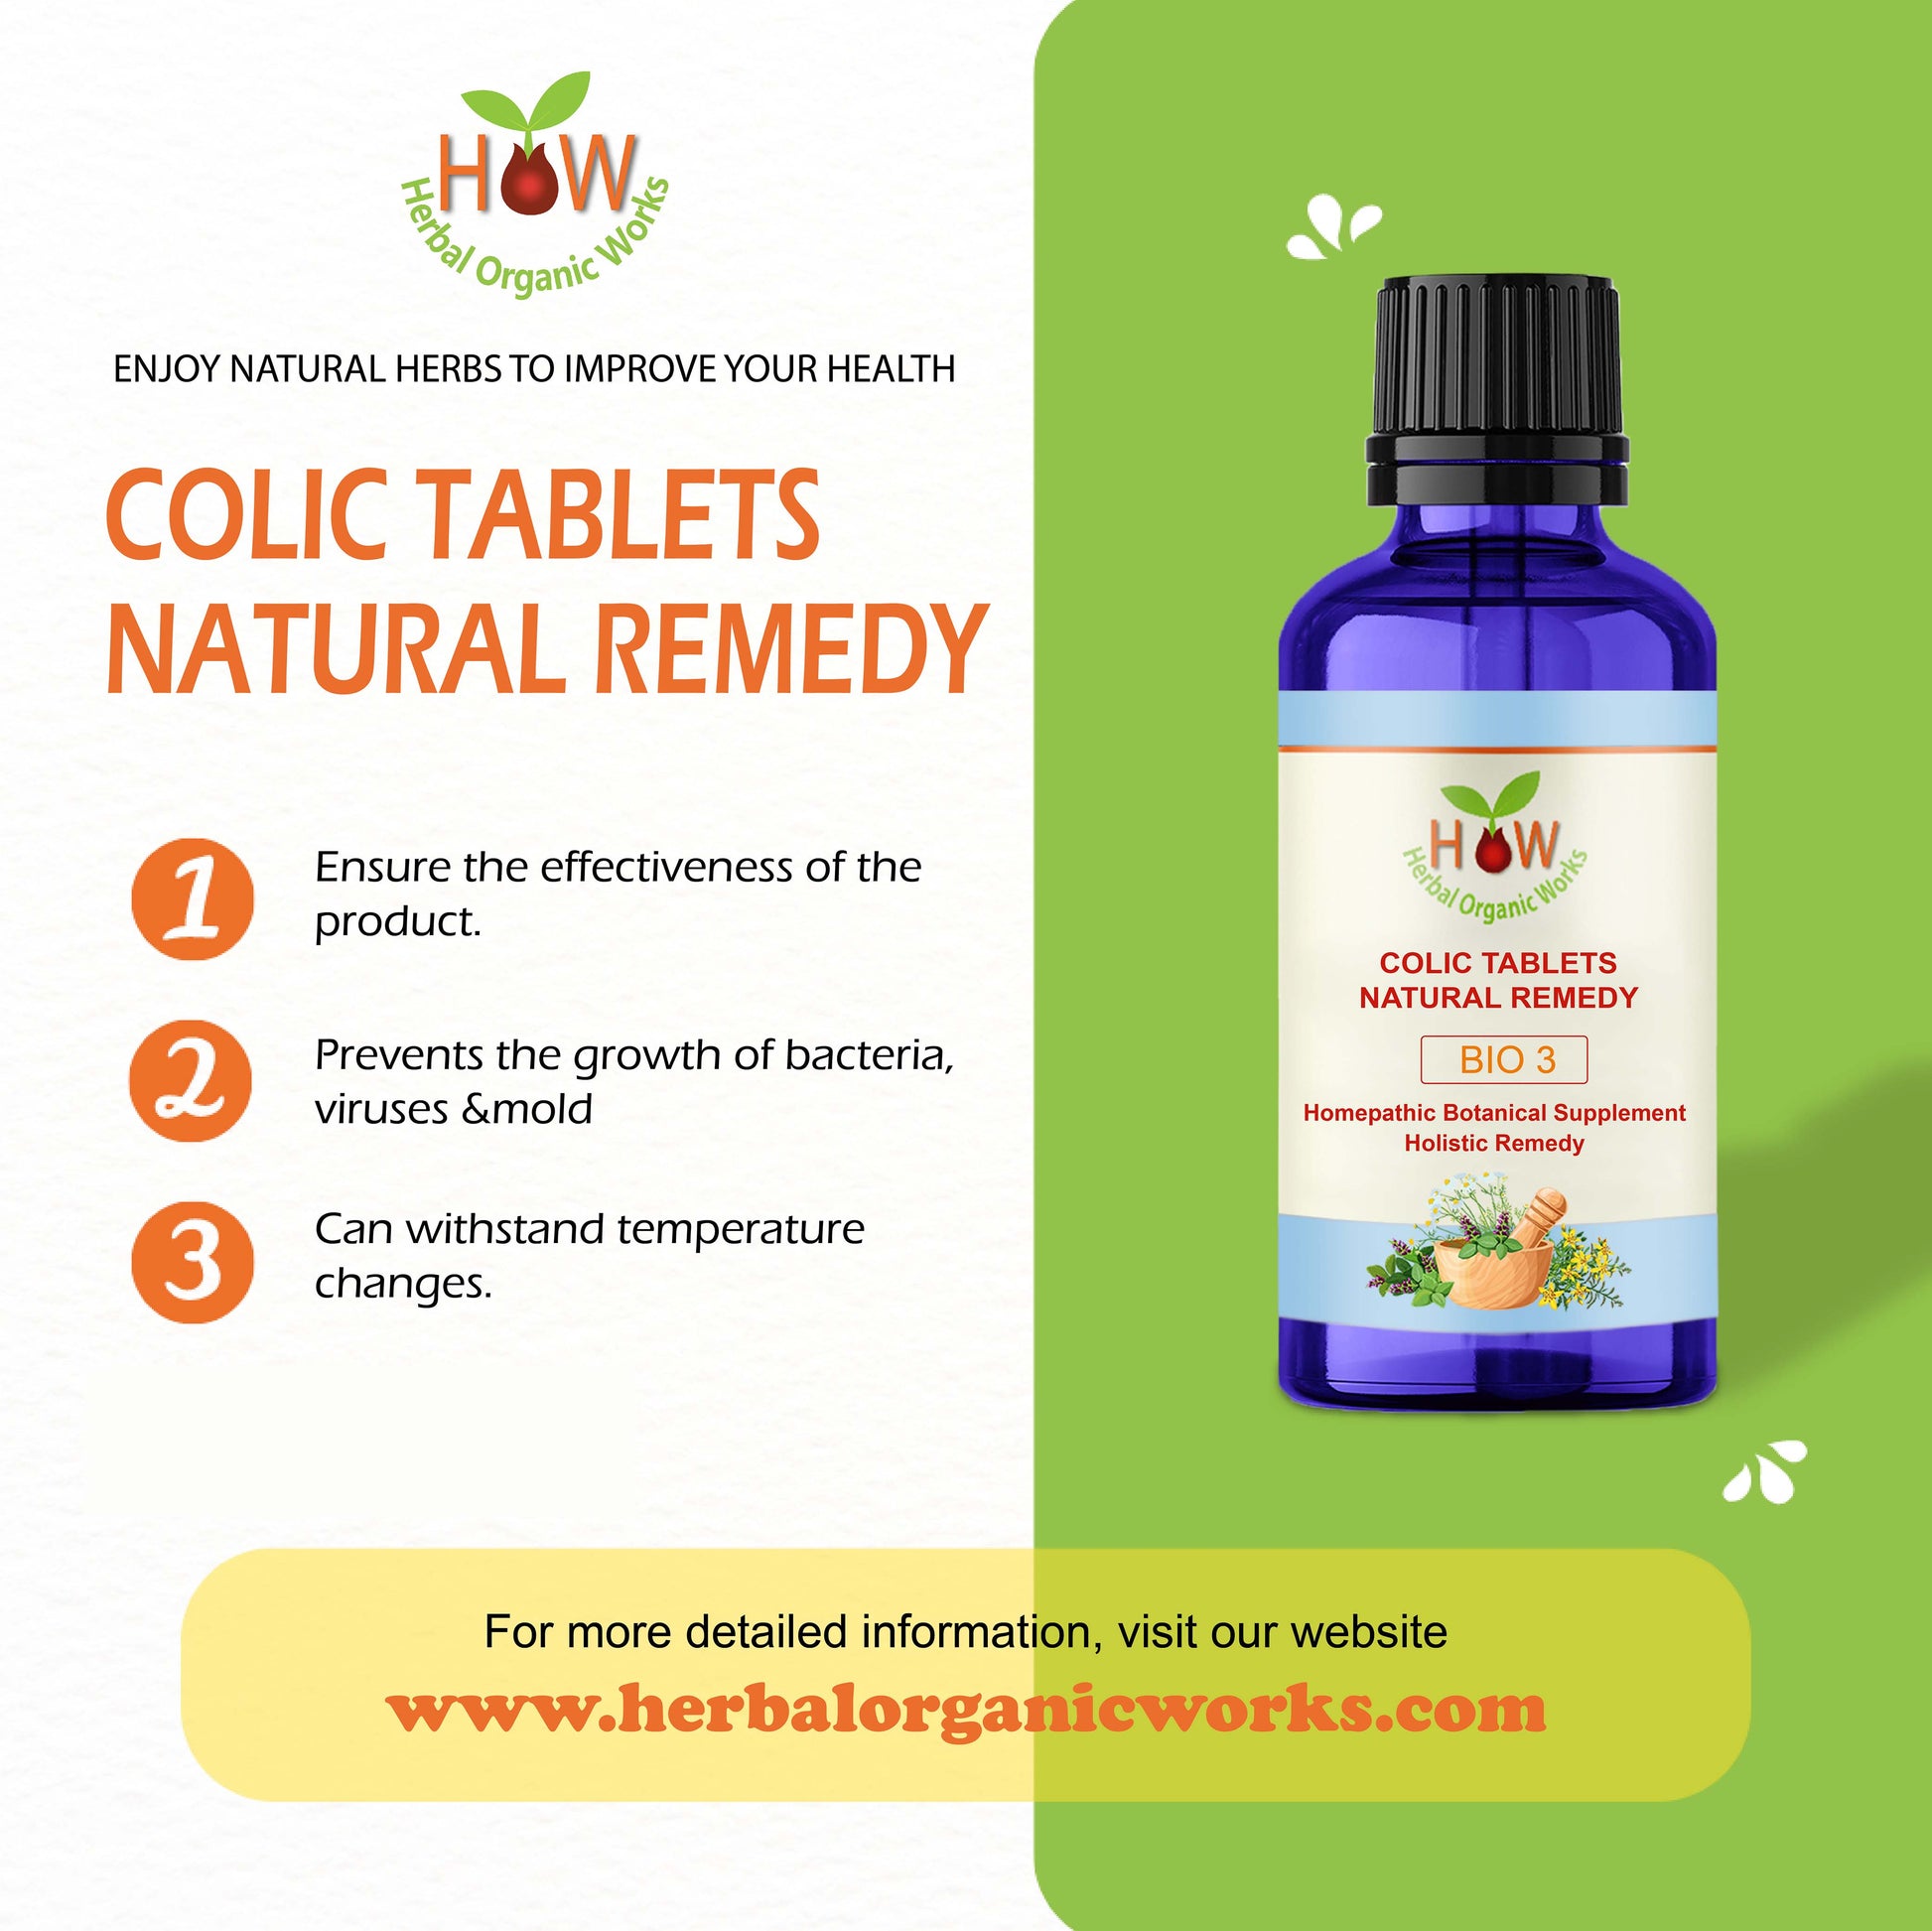 COLIC INFANTS TABLETS NATURAL REMEDIES (BIO 3)